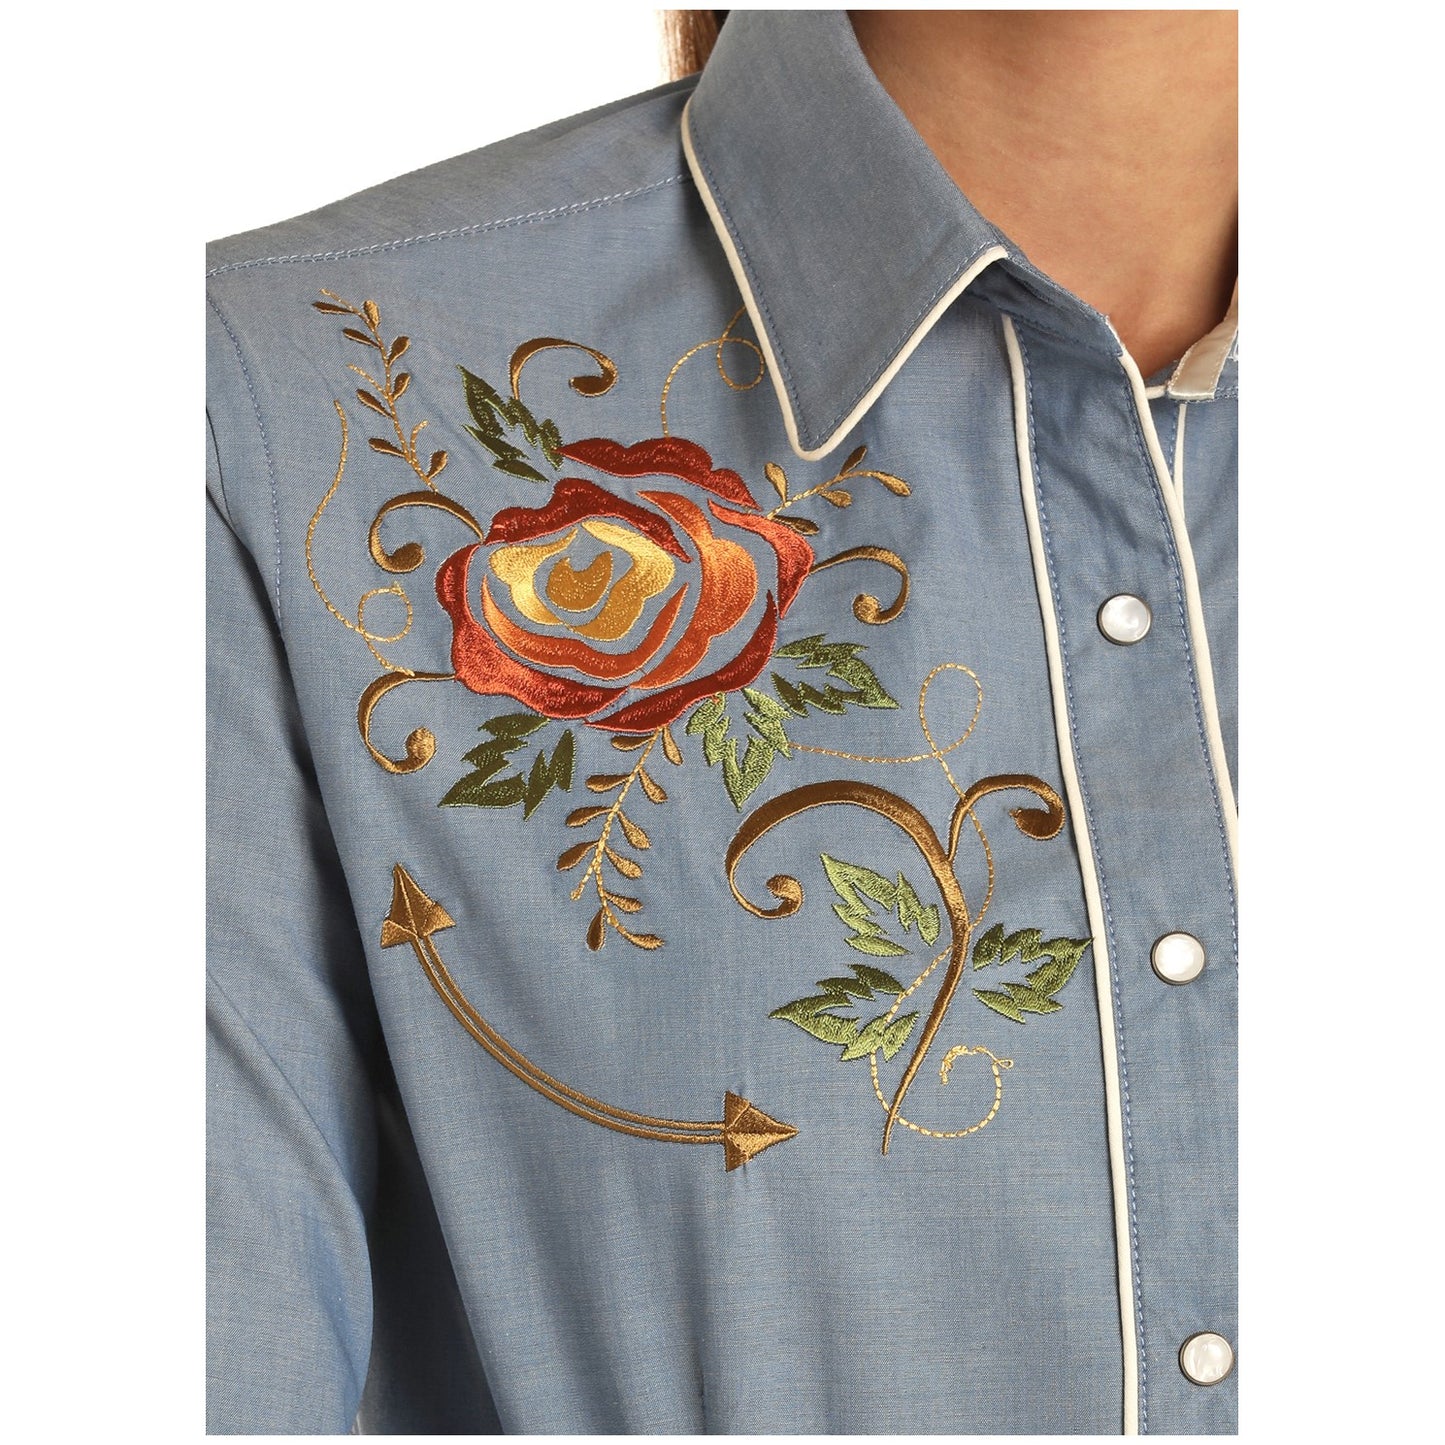 Panhandle Rough Stock Ladies Blue Embroidered Snap Shirt R4S8482